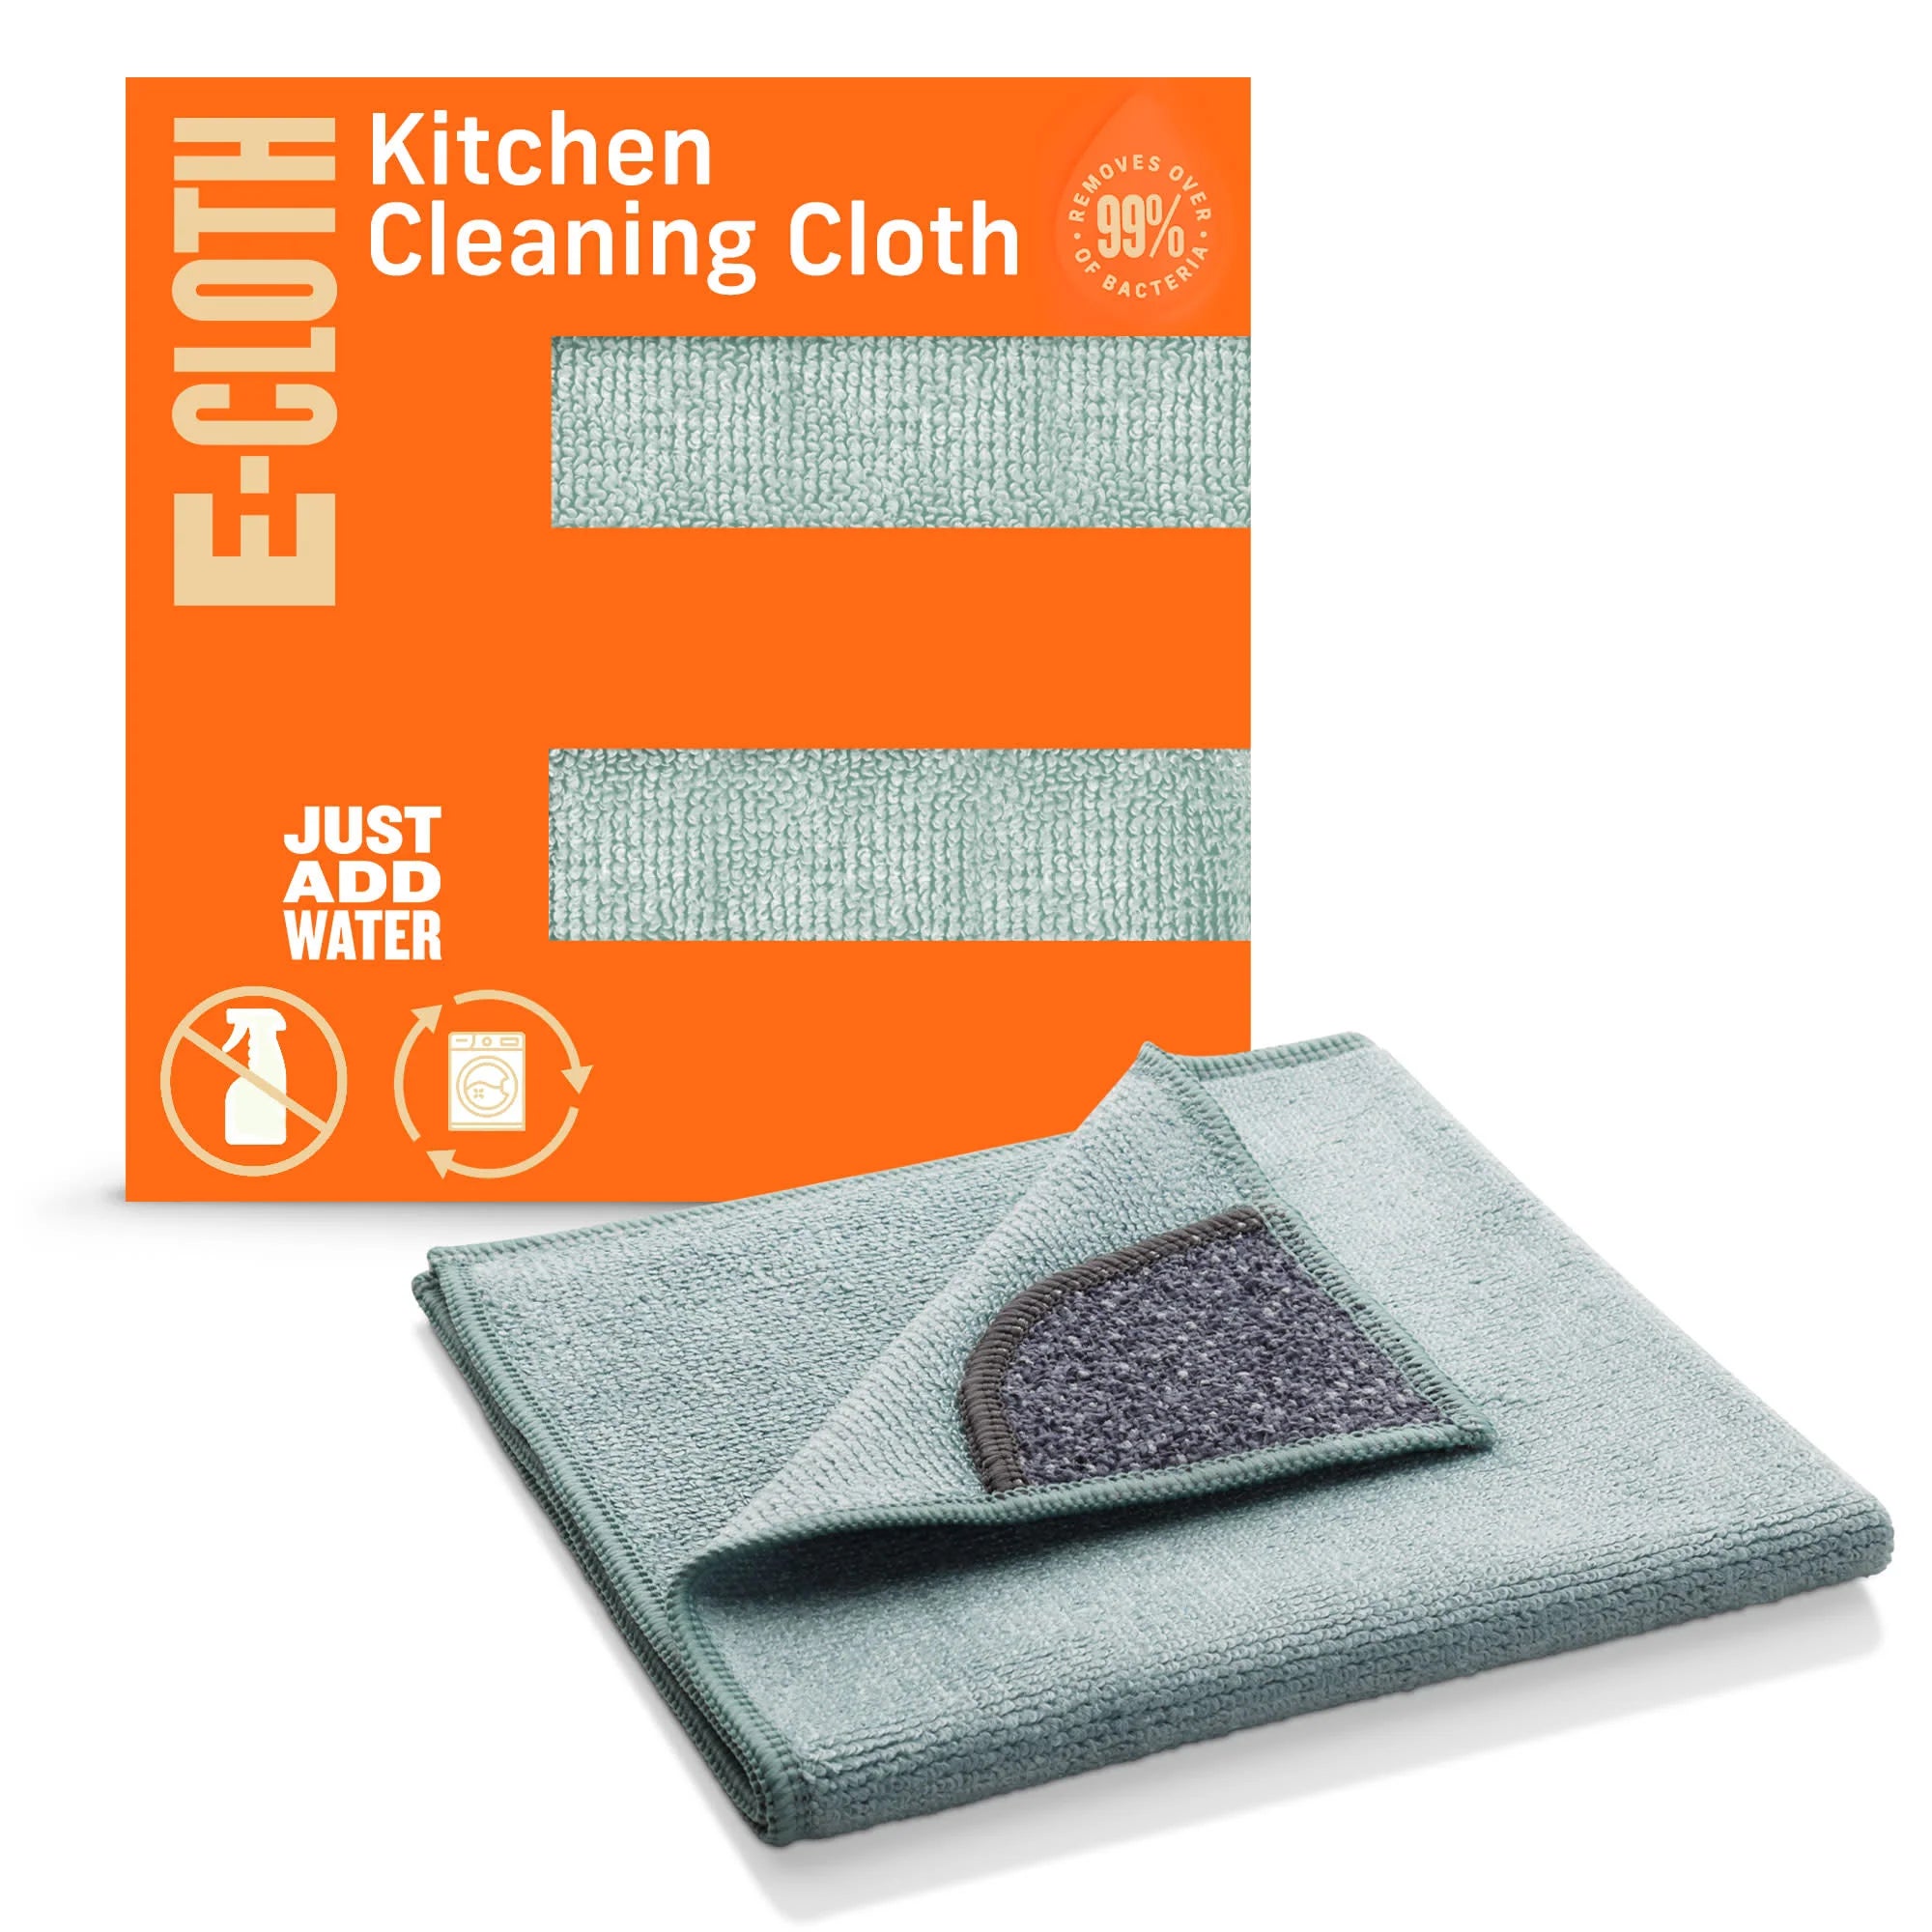 A-1 Vacuum, Eco-Friendly Kitchen Cleaning Cloths